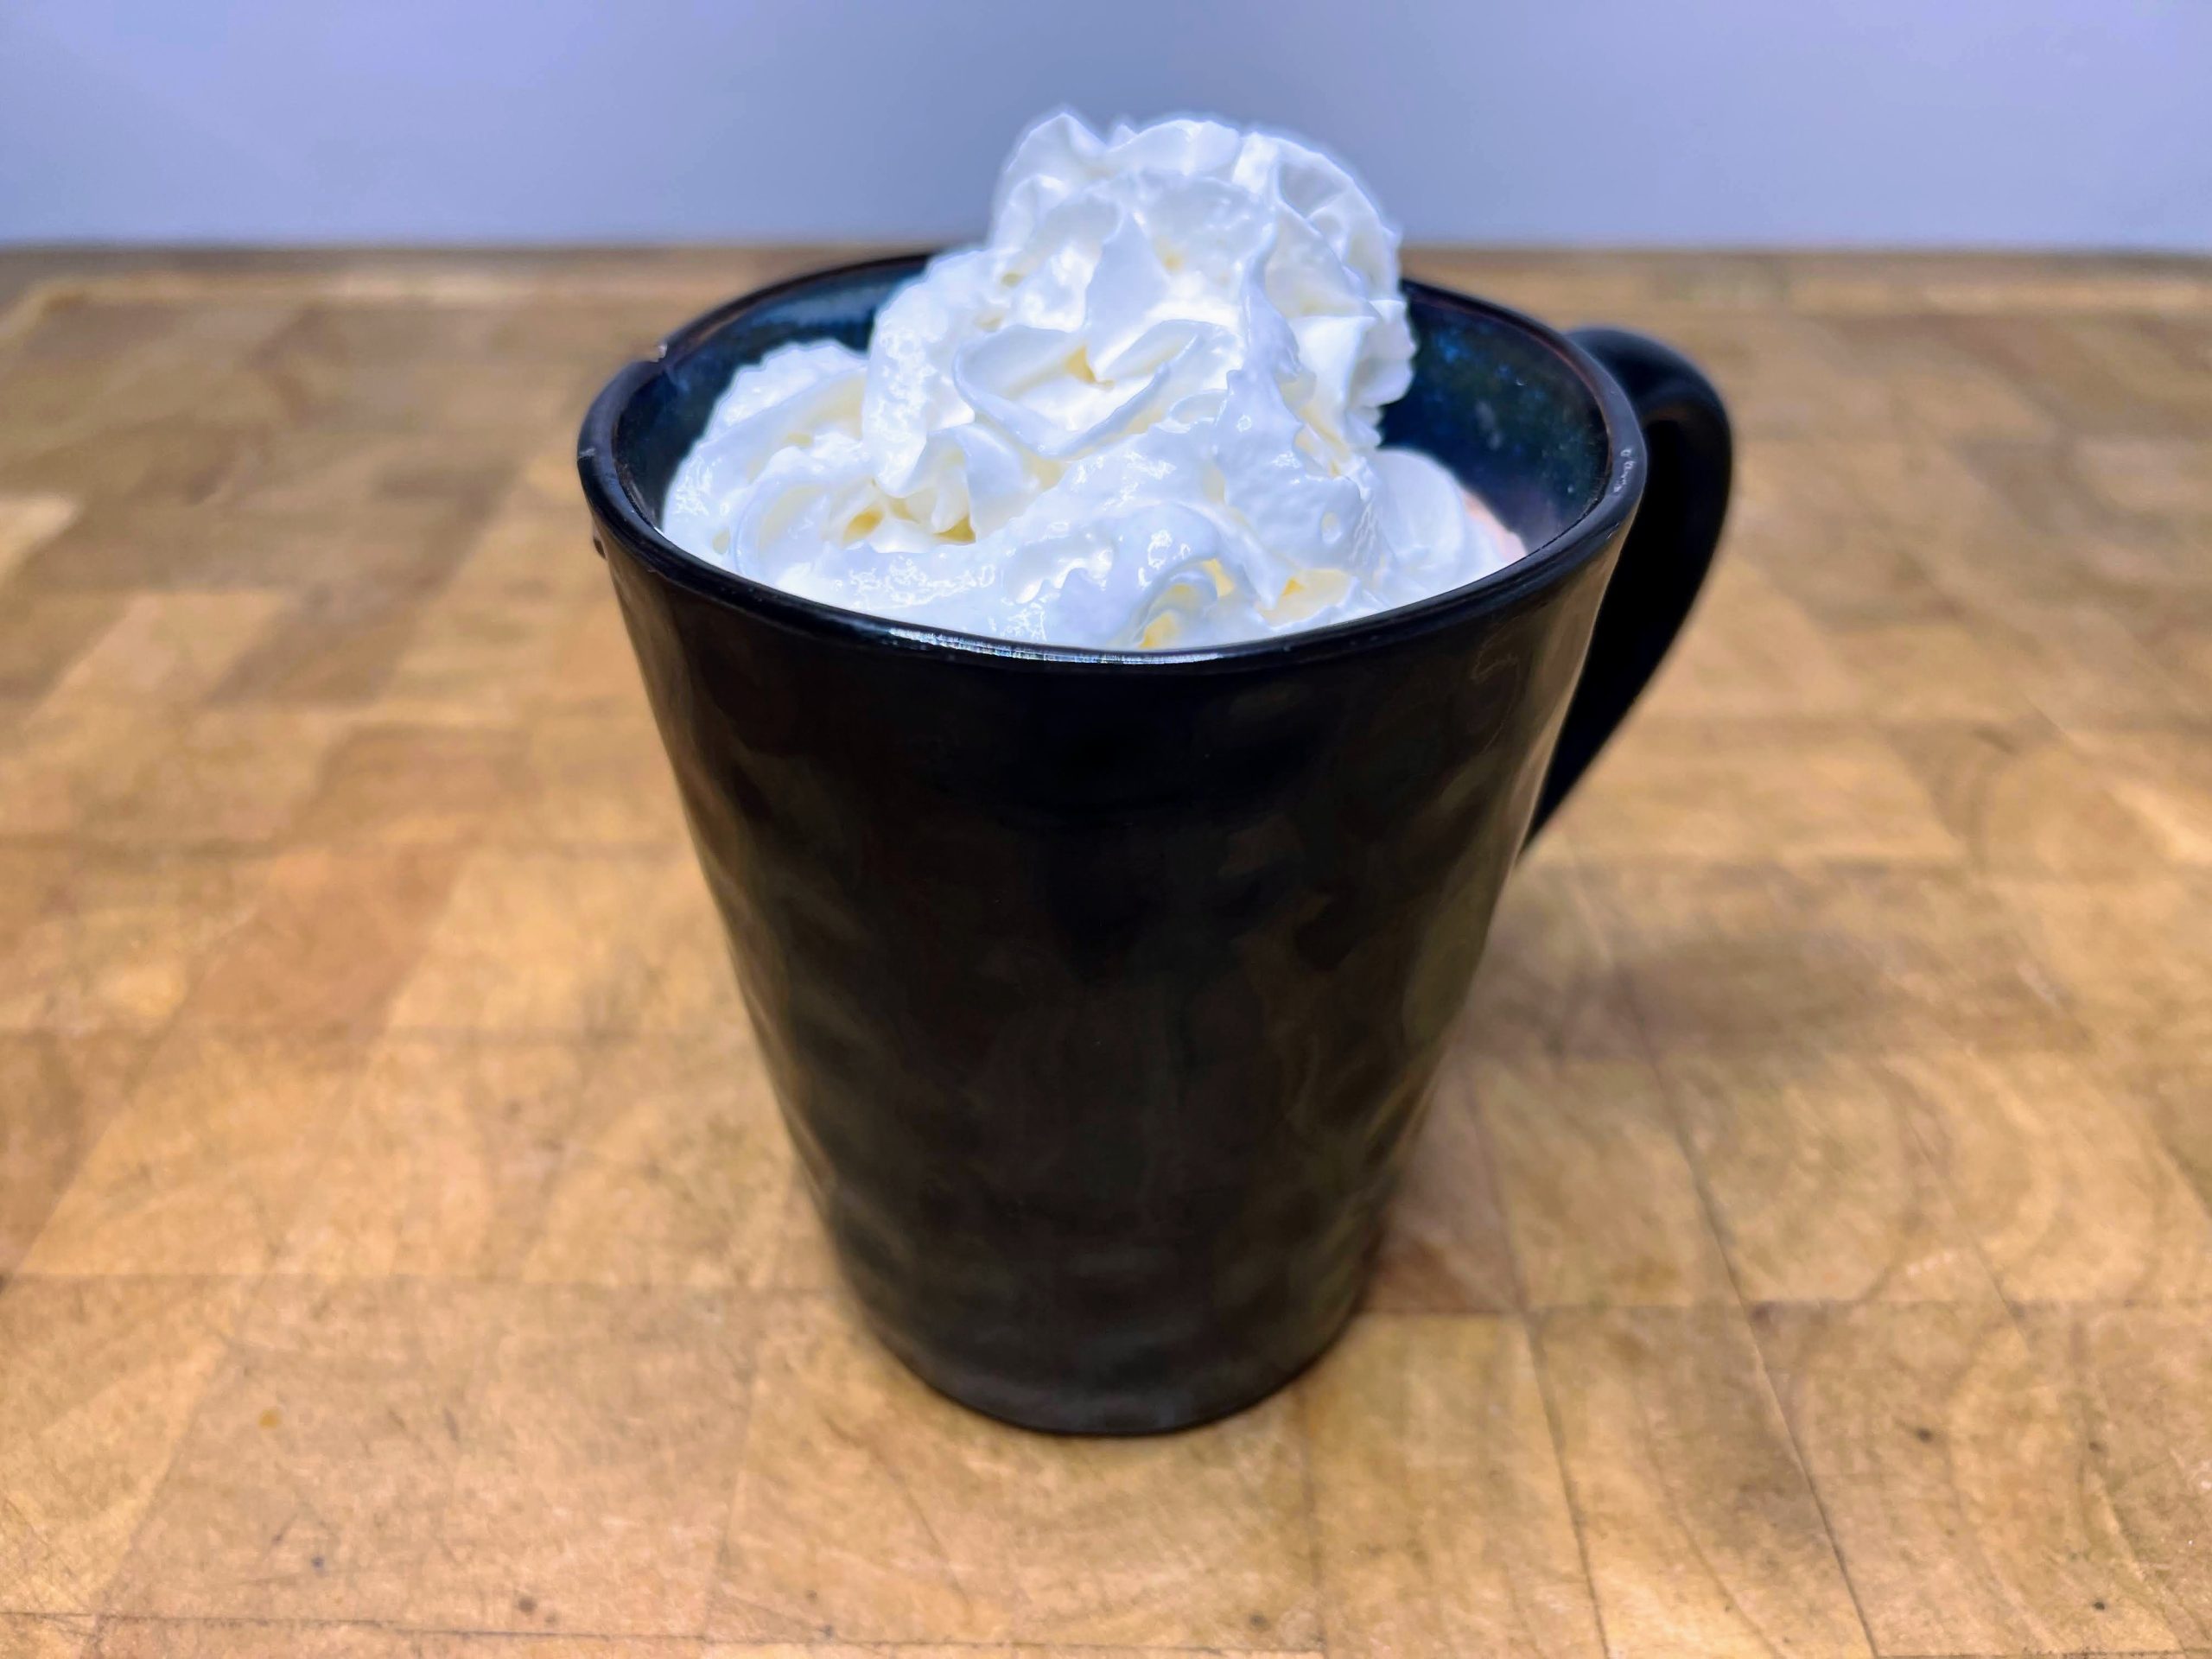 Mug of peppermint schnapps hot chocolate topped with whipped cream.